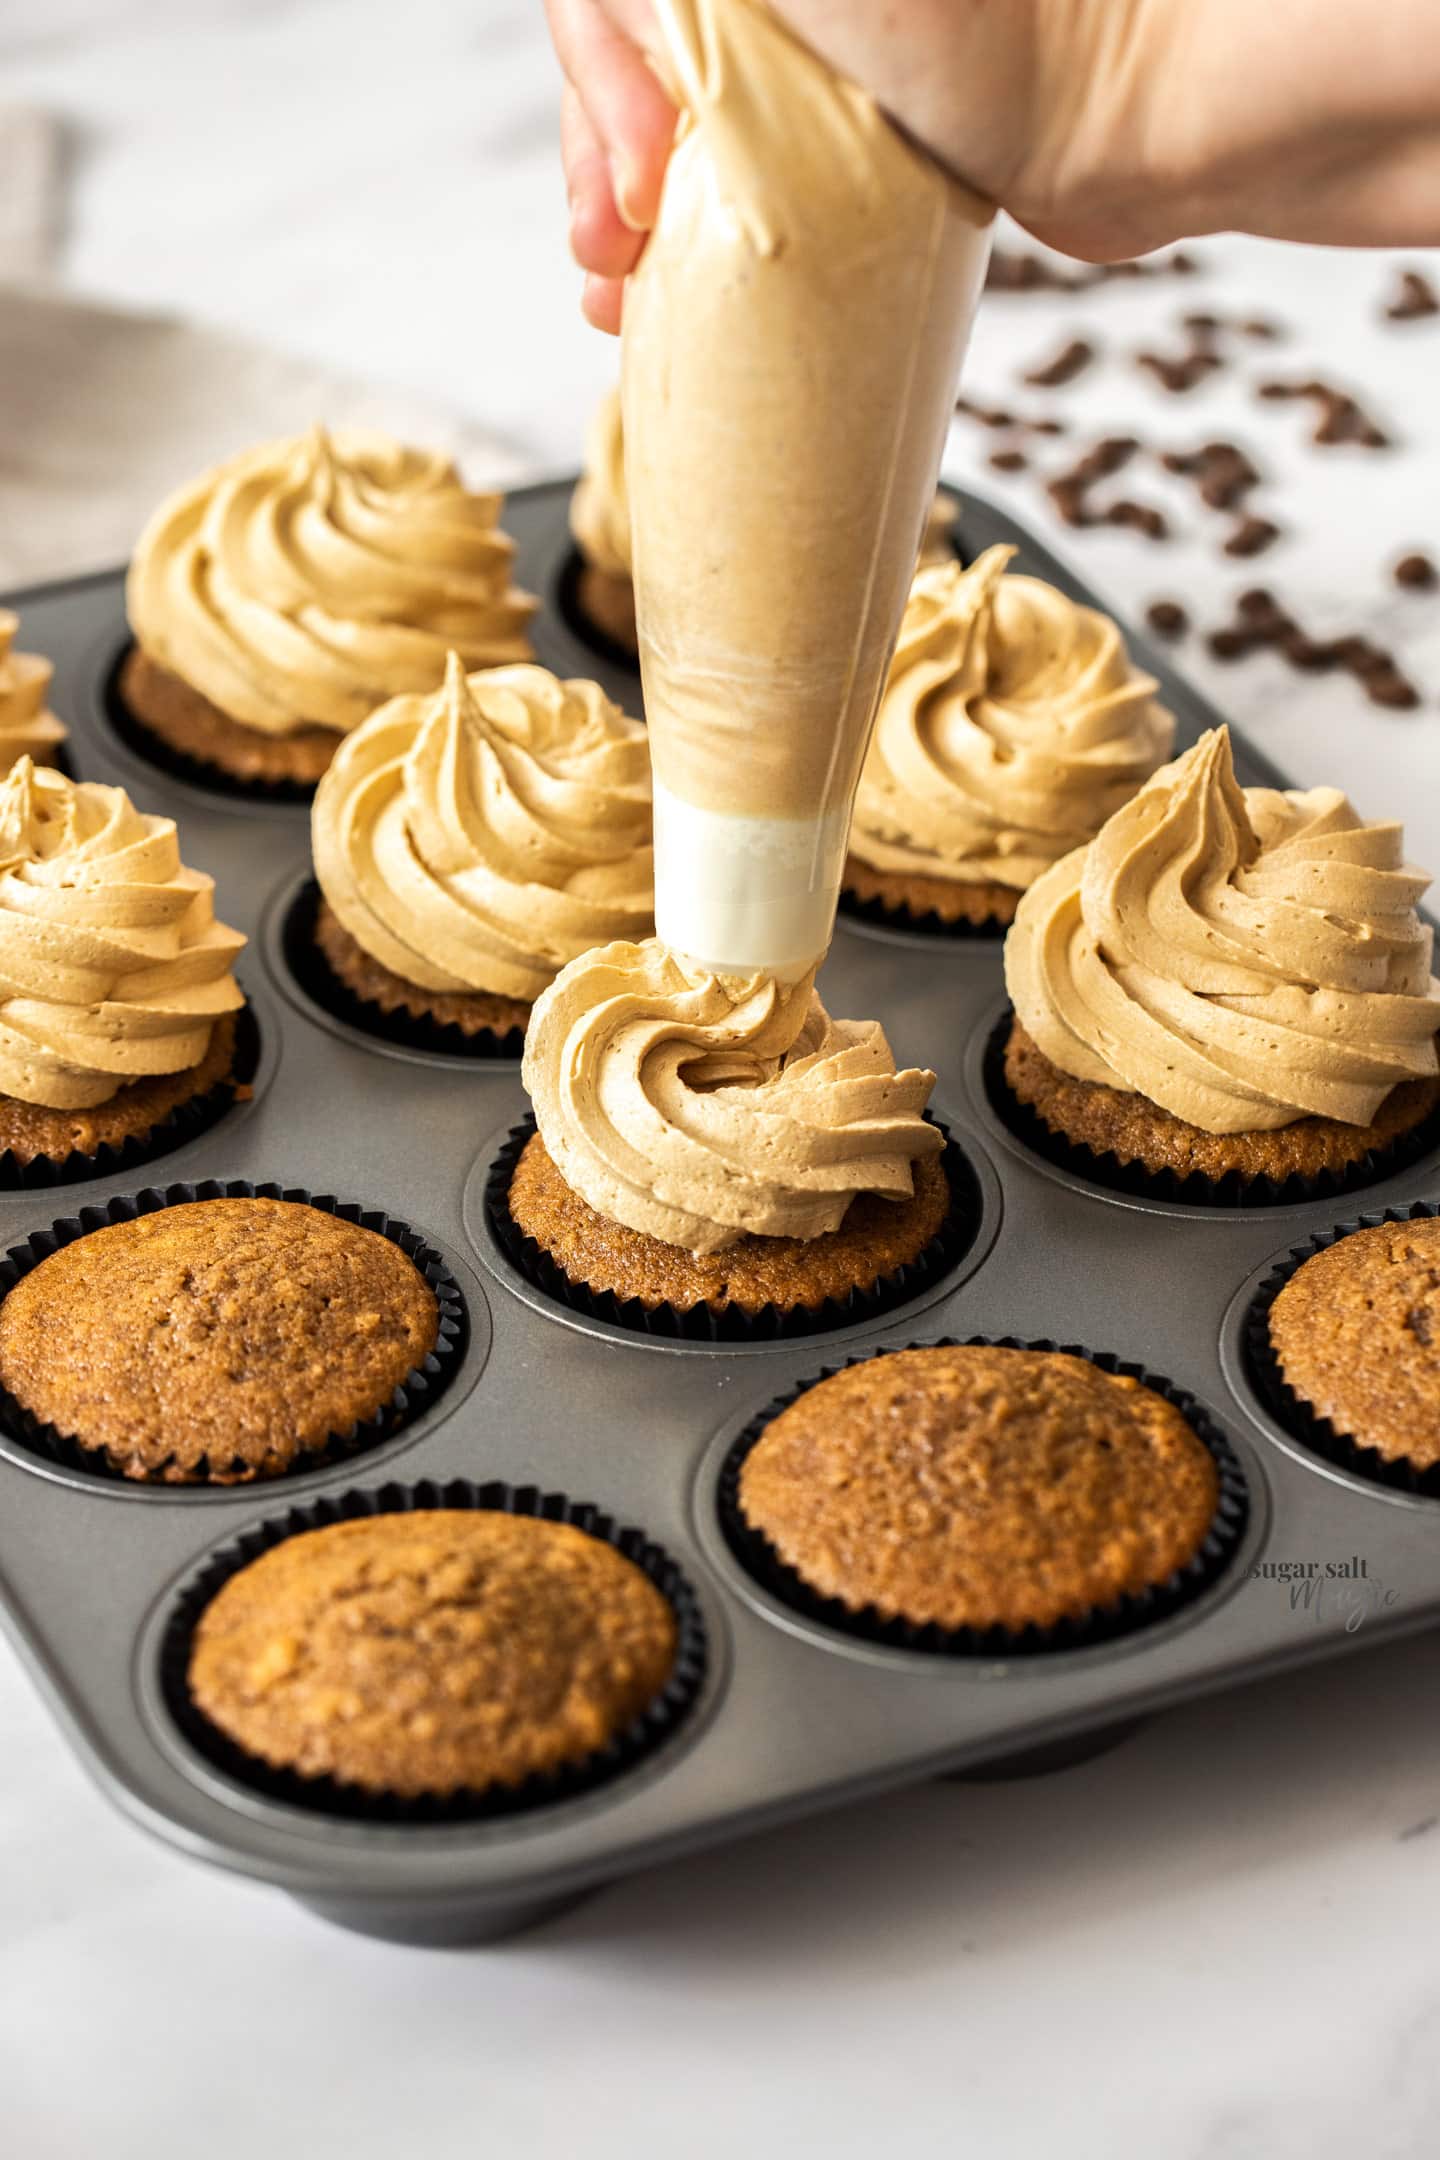 Coffee buttercream being piped onto a cupcake.